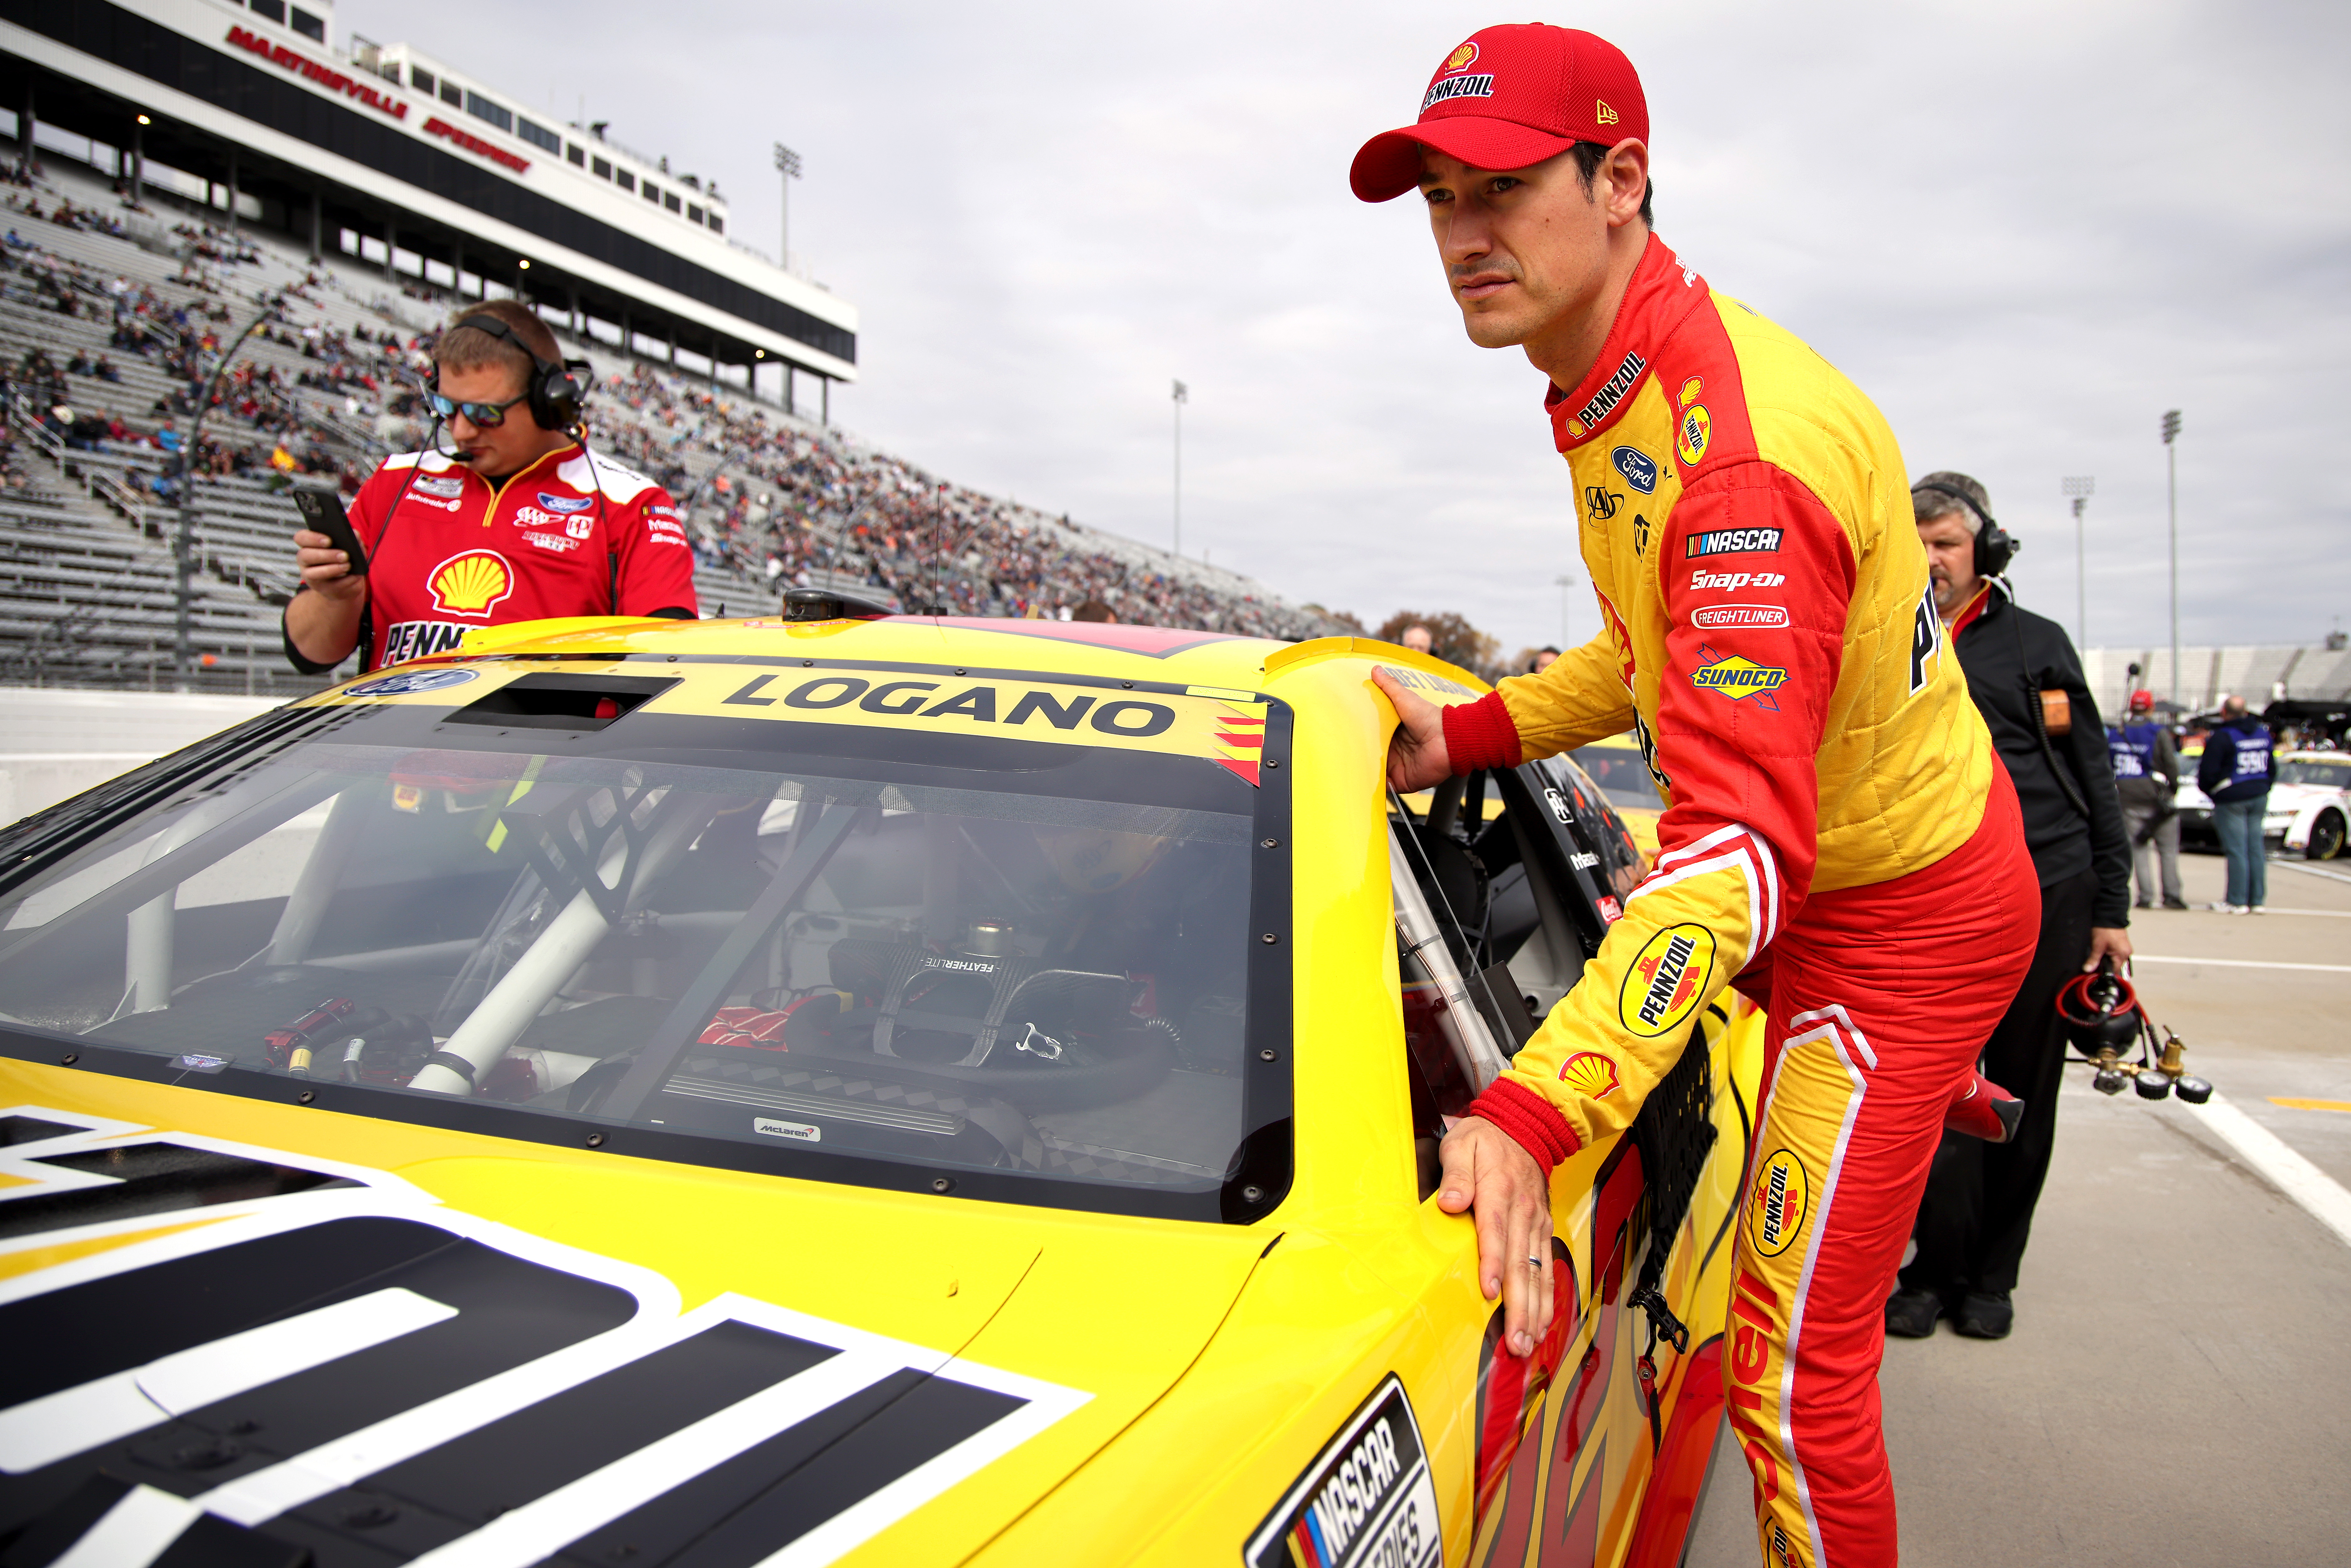 While Joey Logano goes for a joyride Sunday, seven other NASCAR